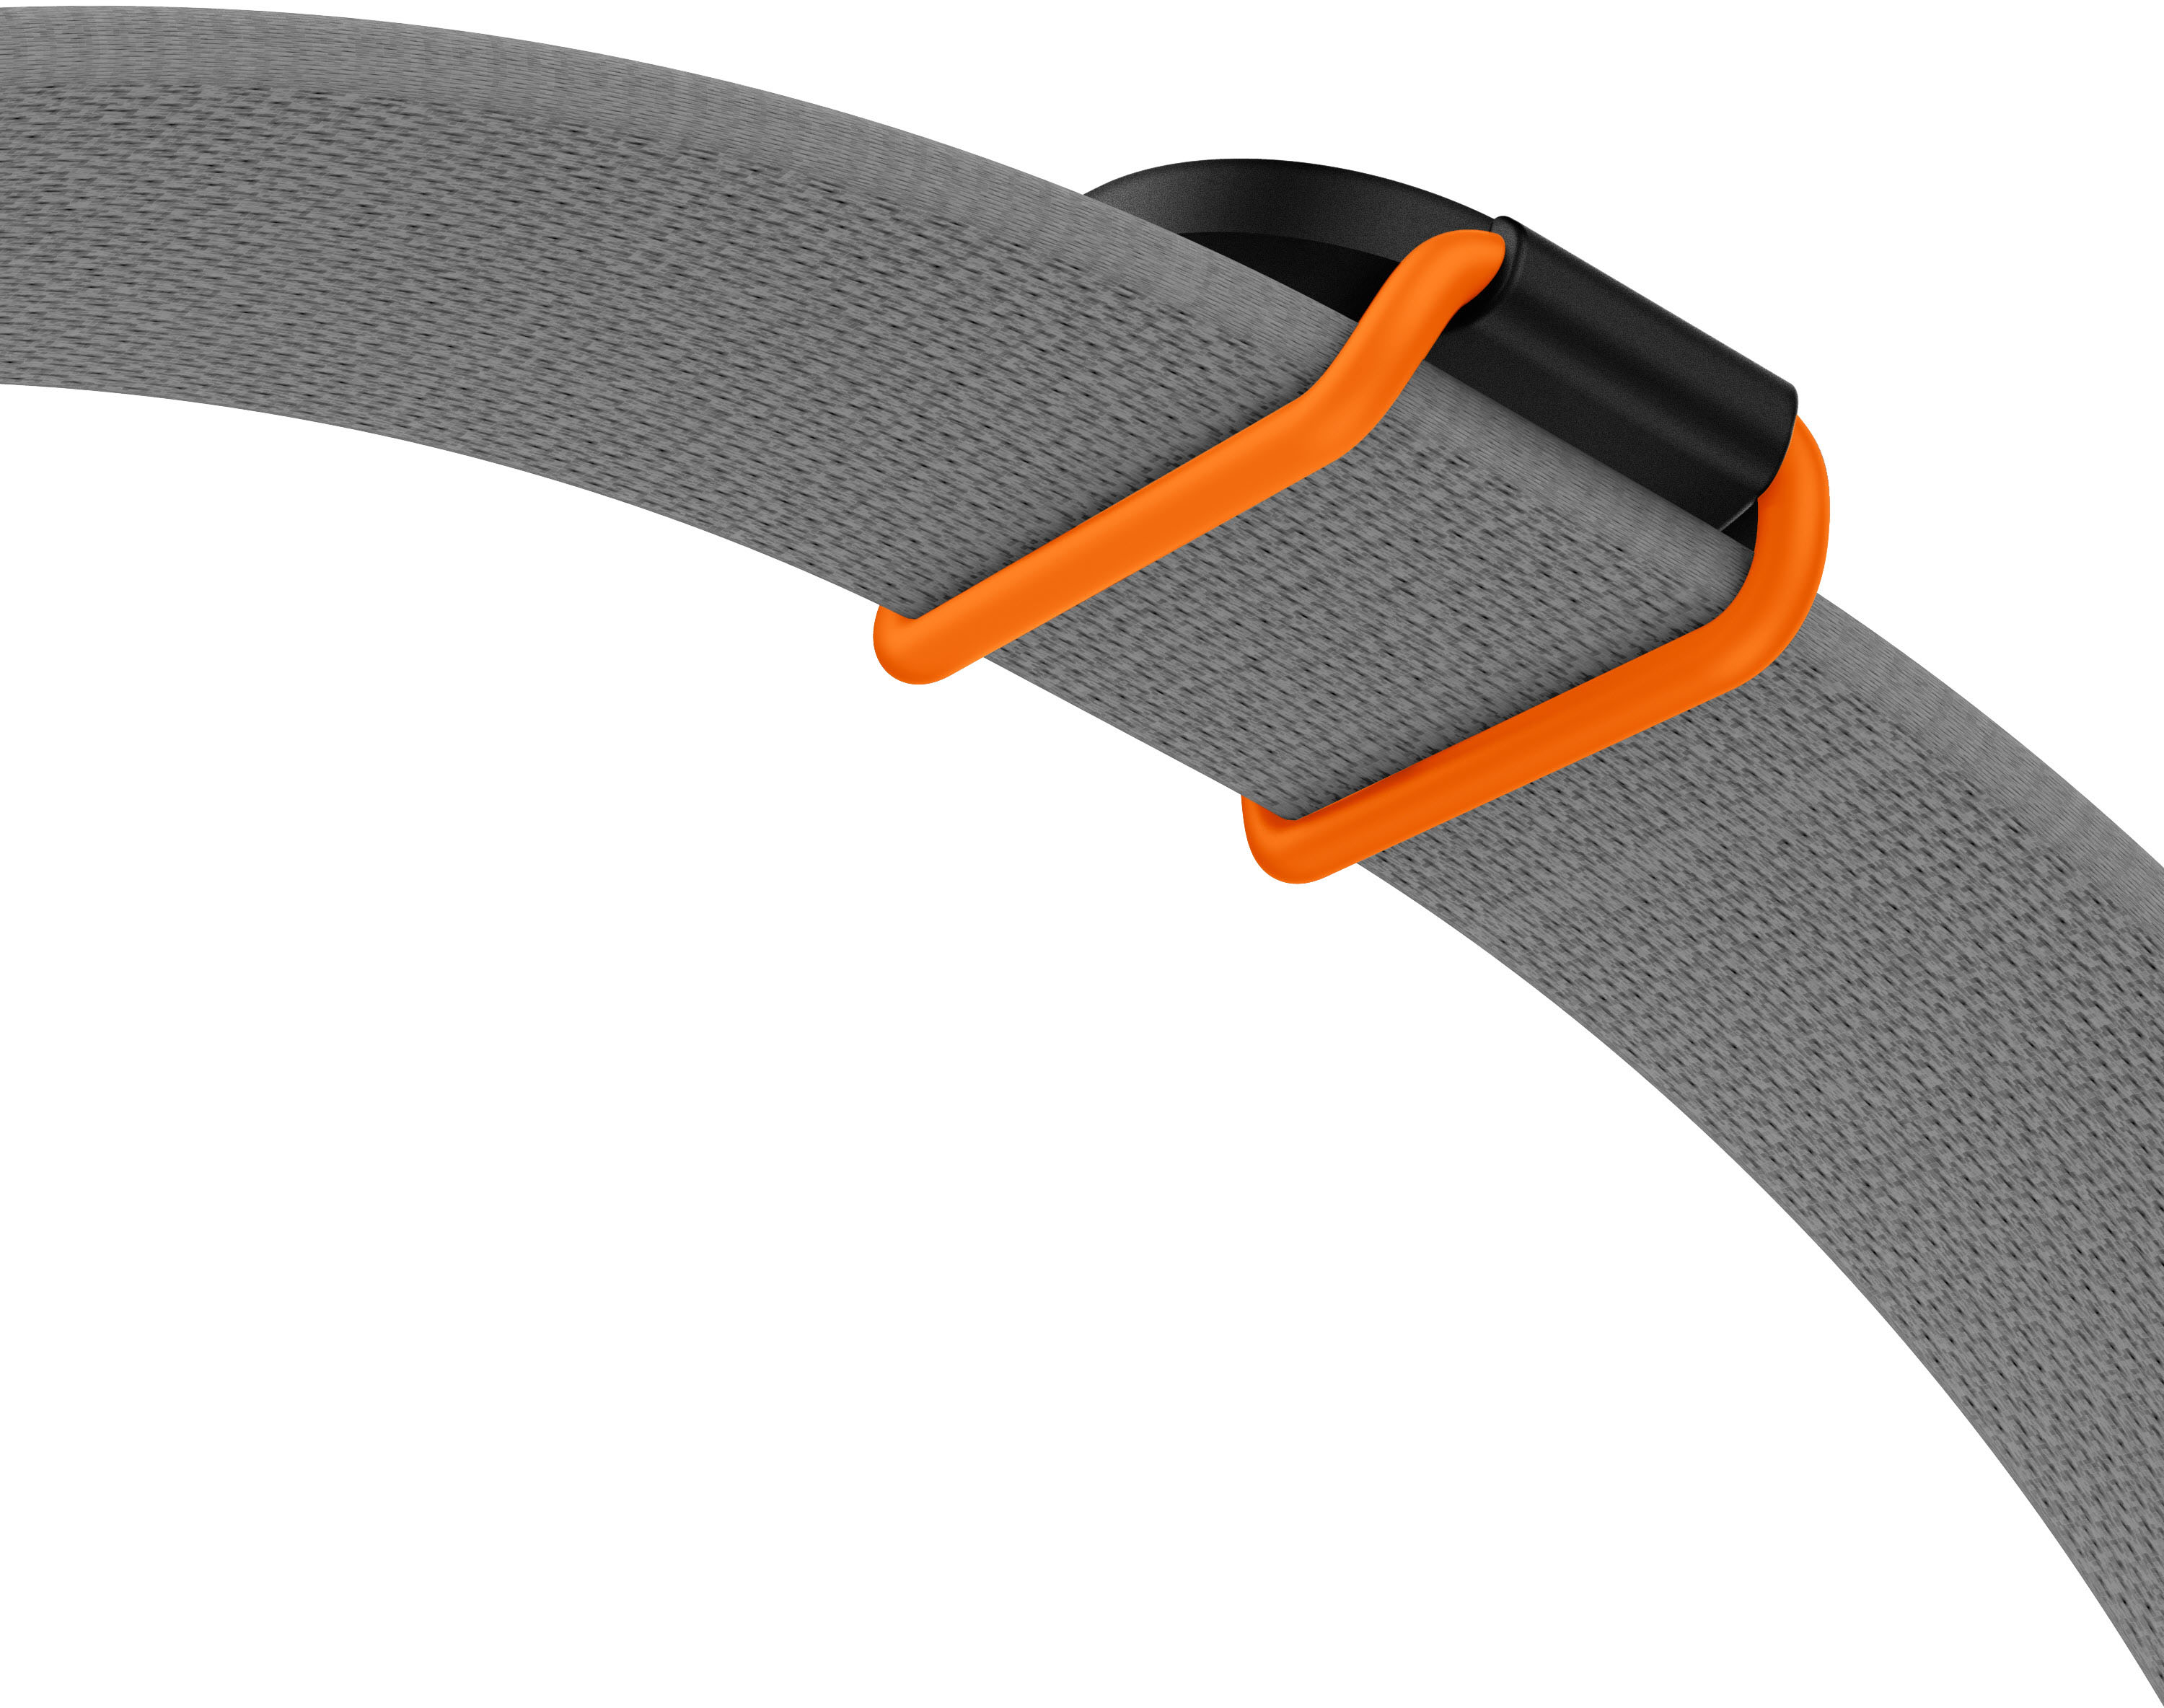 New TagVault: Pet is an AirTag holder for dog collars - Current Mac  Hardware Discussions on AppleInsider Forums